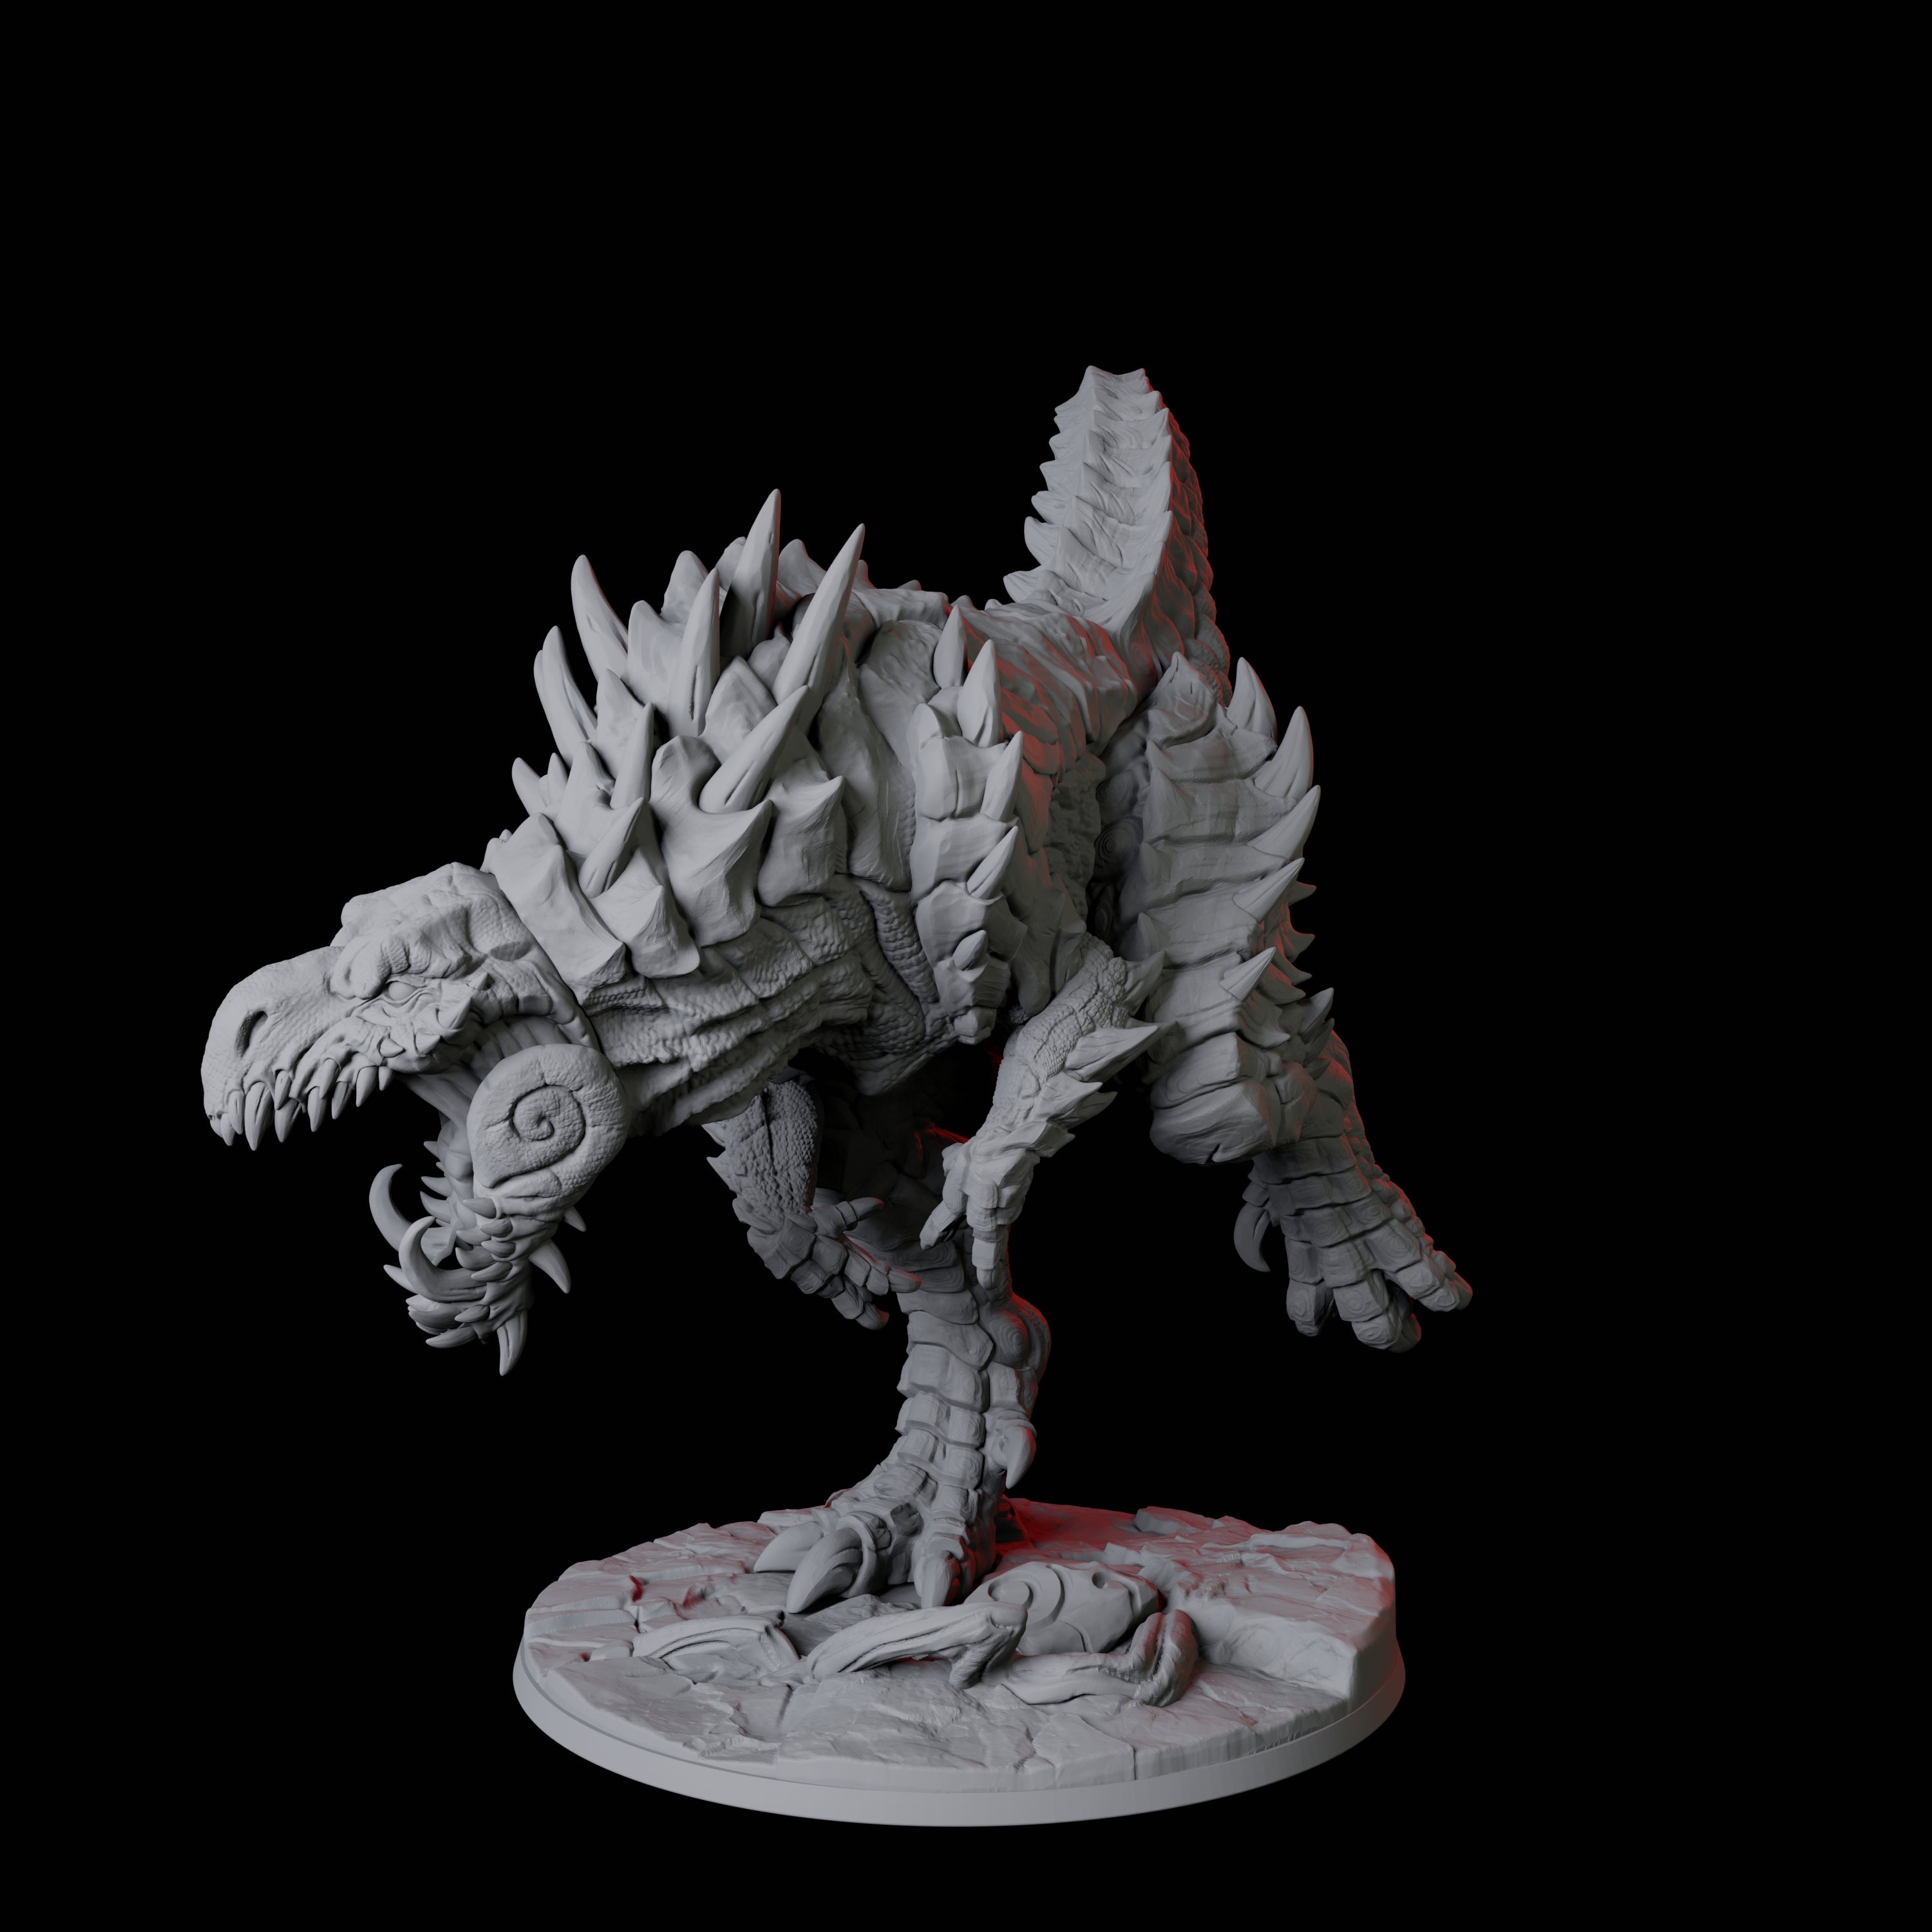 Stalking Tyrannosaurus Rex Miniature for Dungeons and Dragons, Pathfinder or other TTRPGs